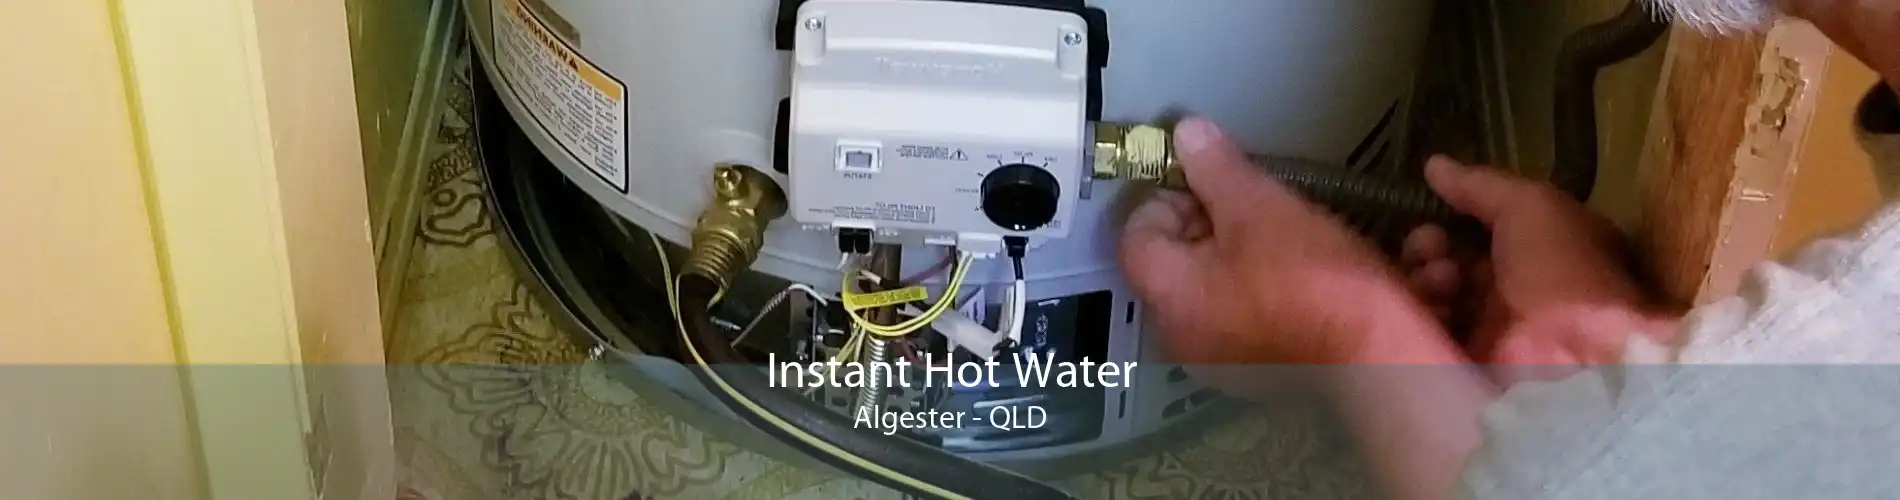 Instant Hot Water Algester - QLD